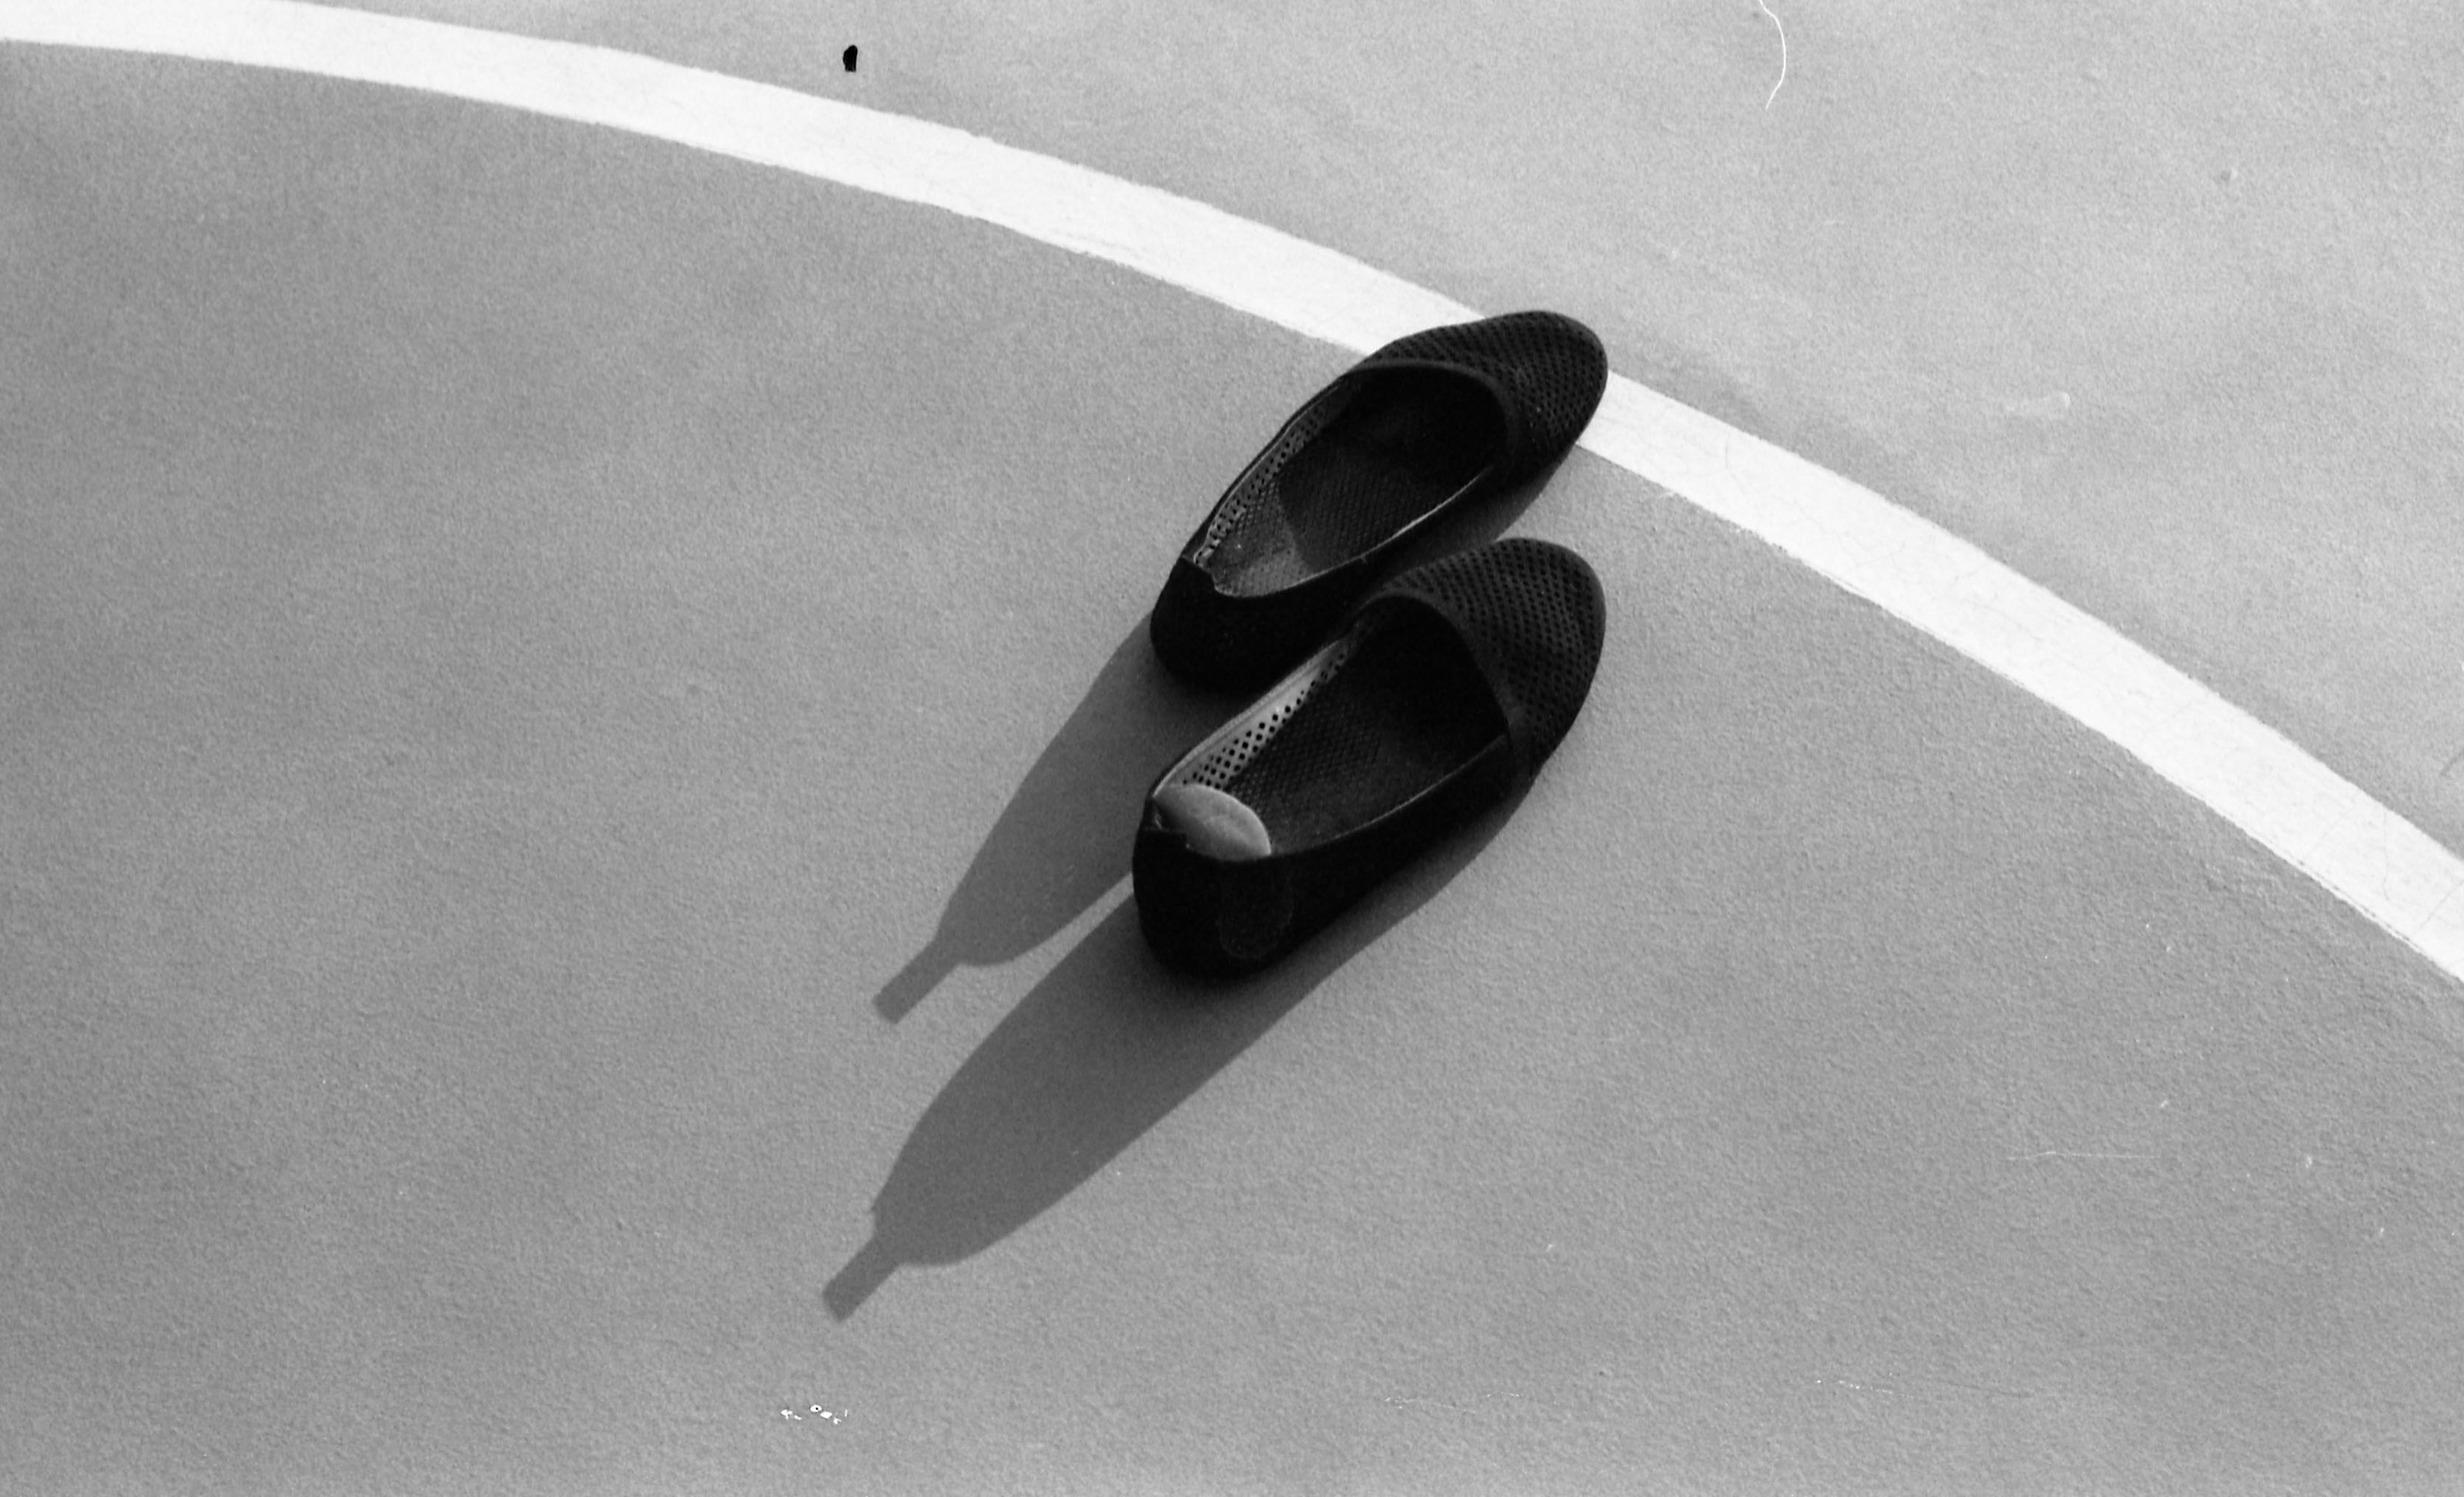 A pair of black ballerina shoes placed on a gray floor outdoors.